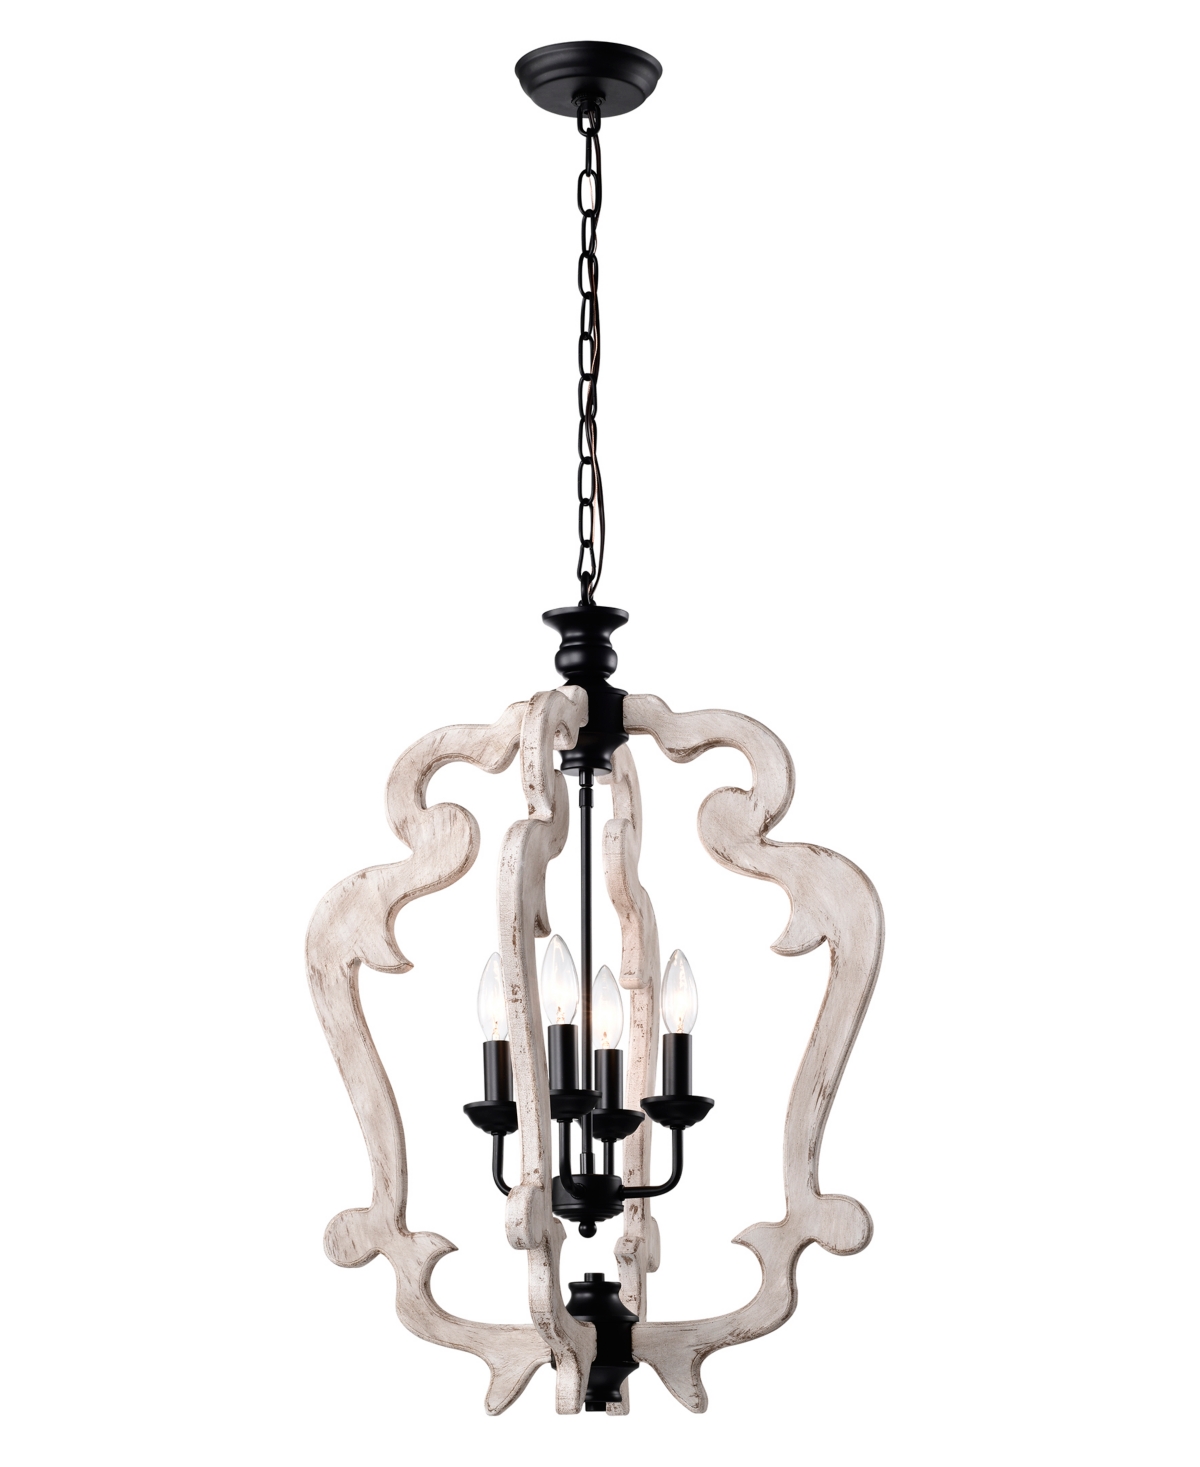 Home Accessories Biga 20" Indoor Finish Chandelier With Light Kit In Matte Black And Weathered White